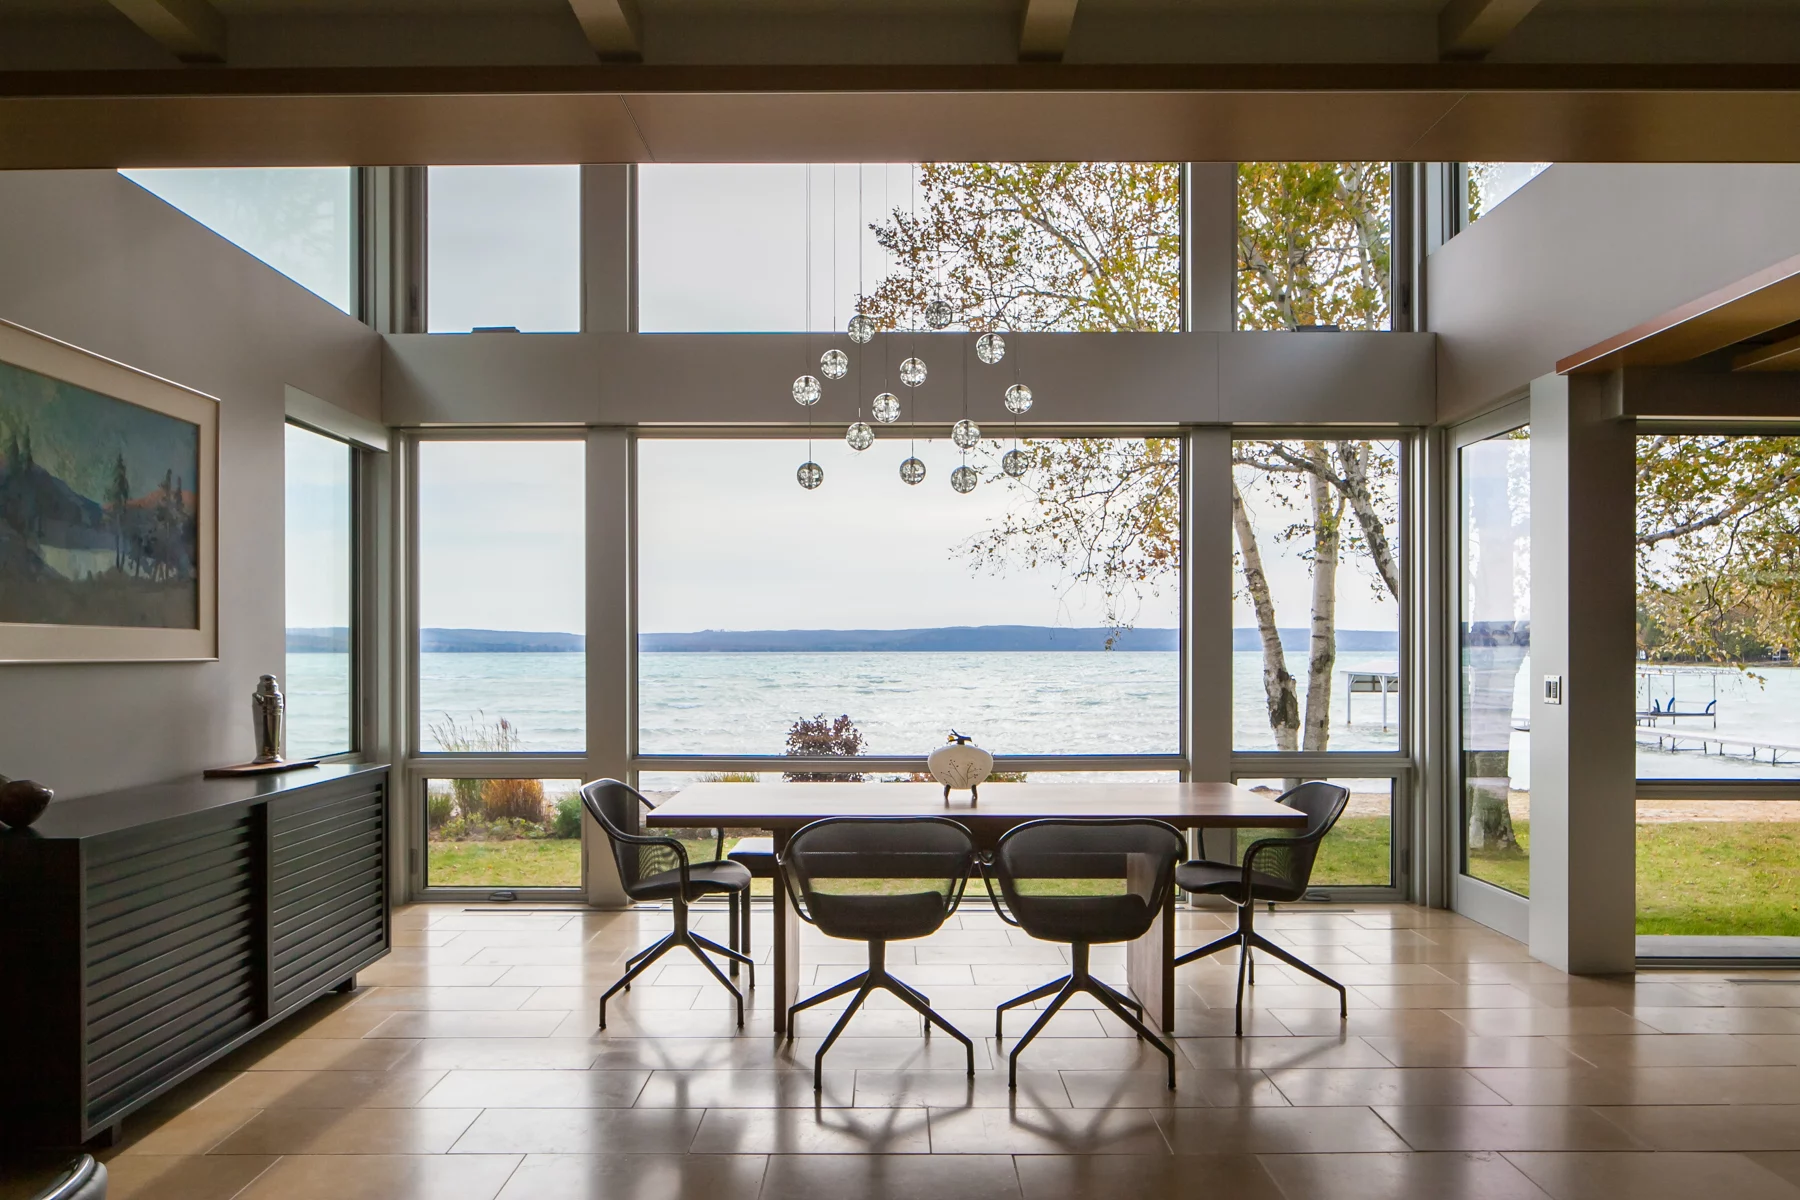 This 1,000-square-foot addition to the home frames stunning views of Glen Lake in northern Michiganin the dining area and other rooms.